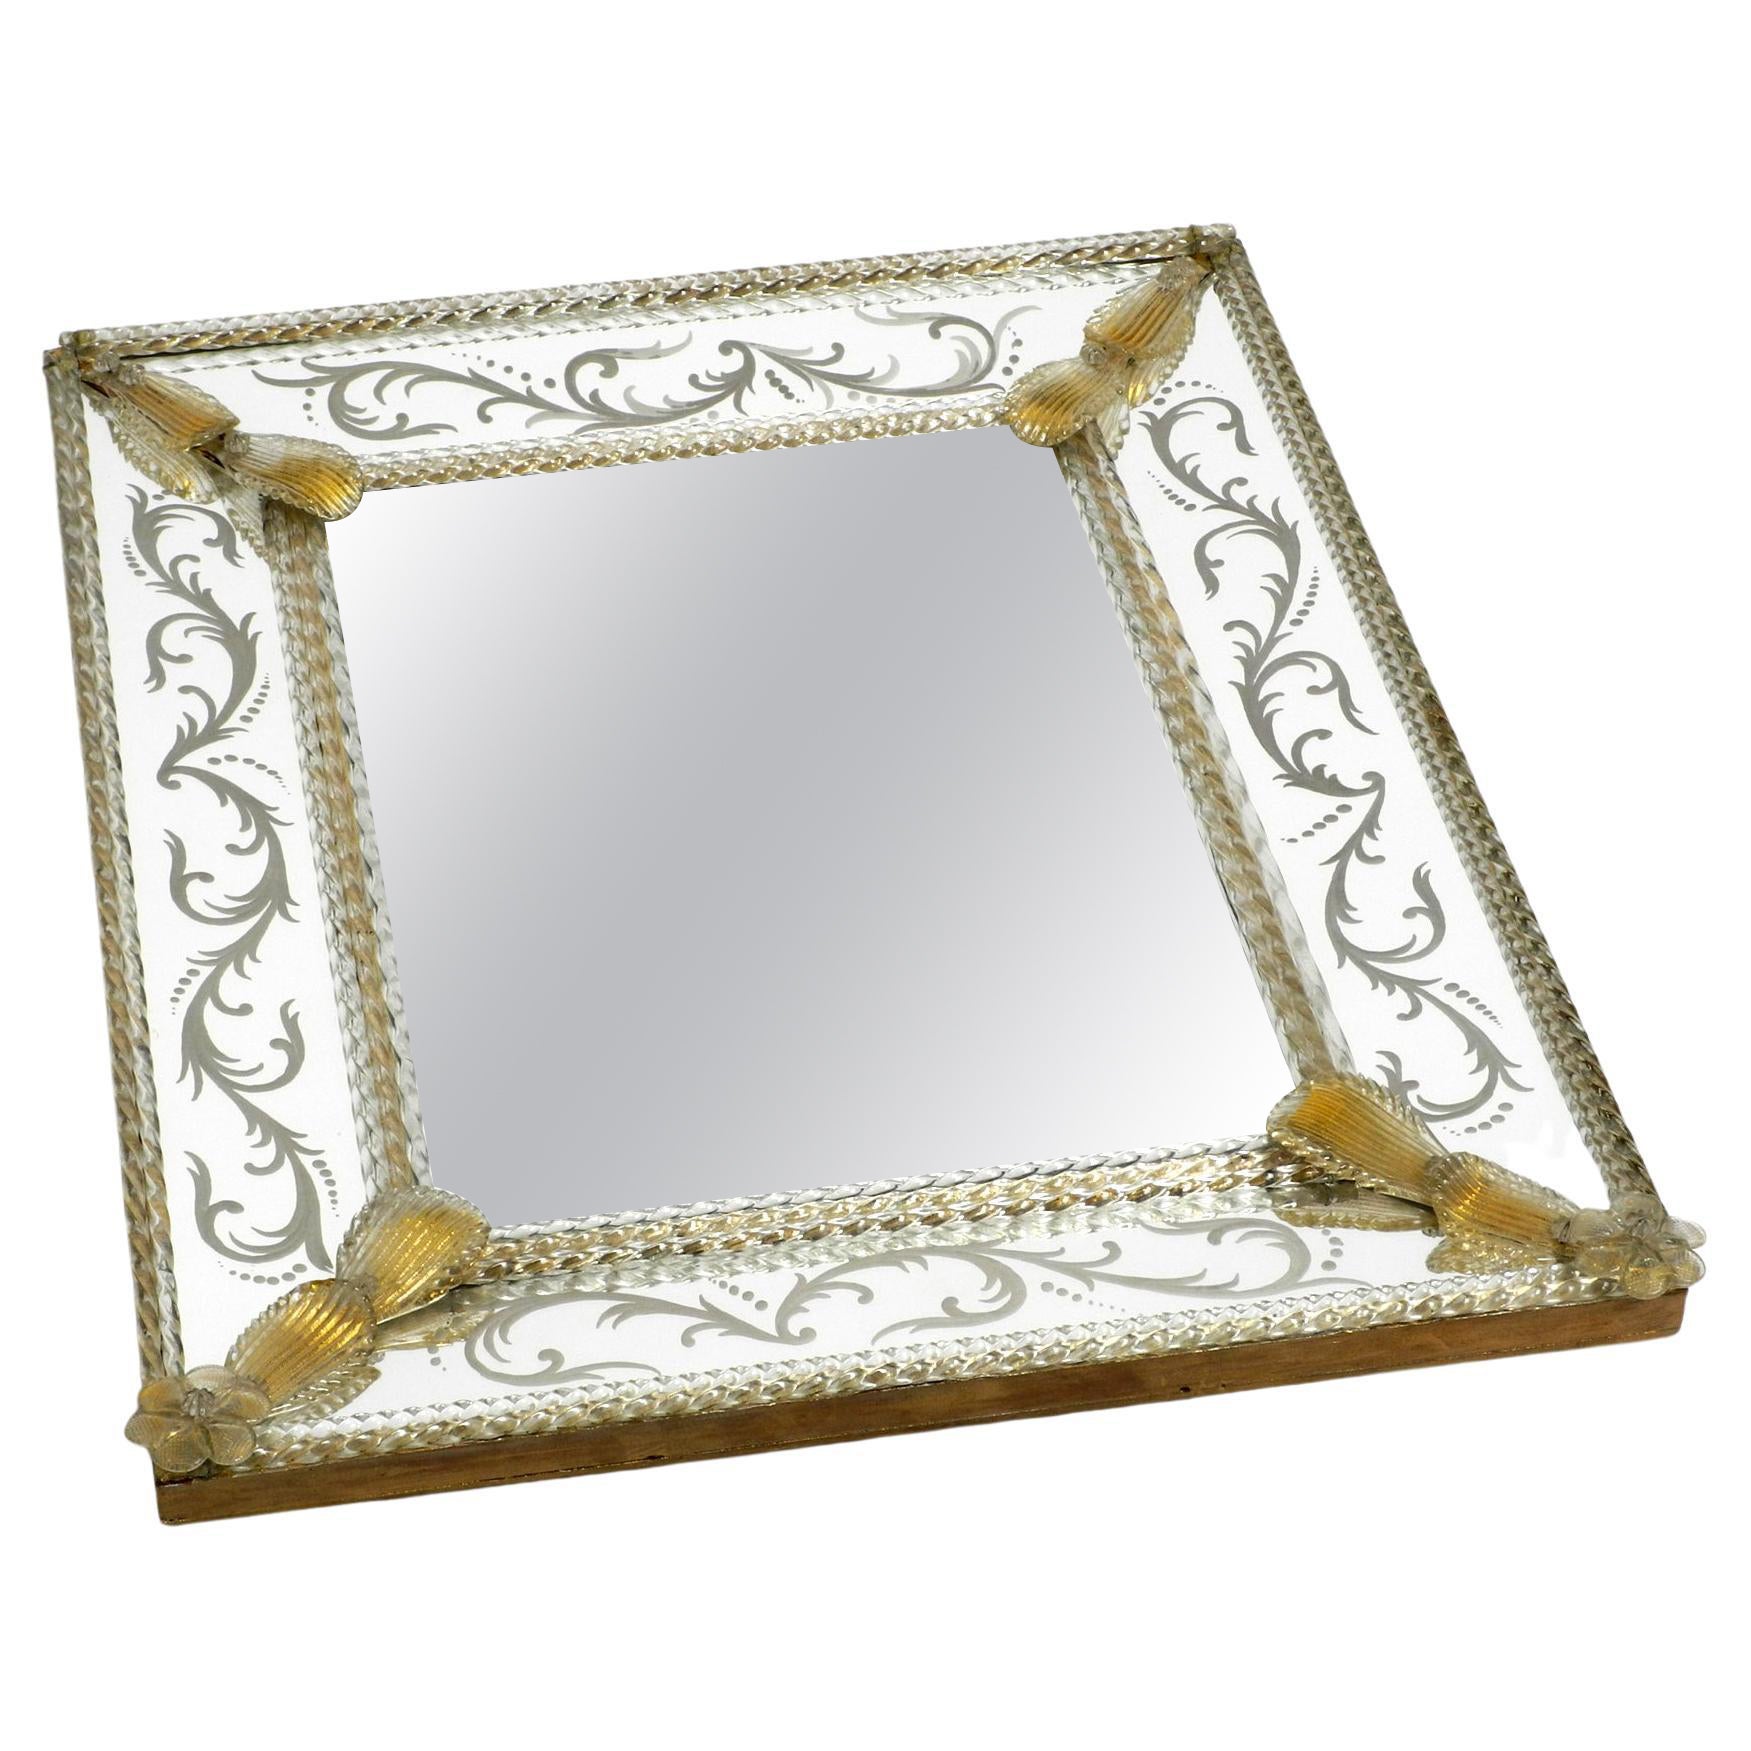 Italian Midcentury Wall Mirror with Murano Glass Frame by Barovier & Toso For Sale